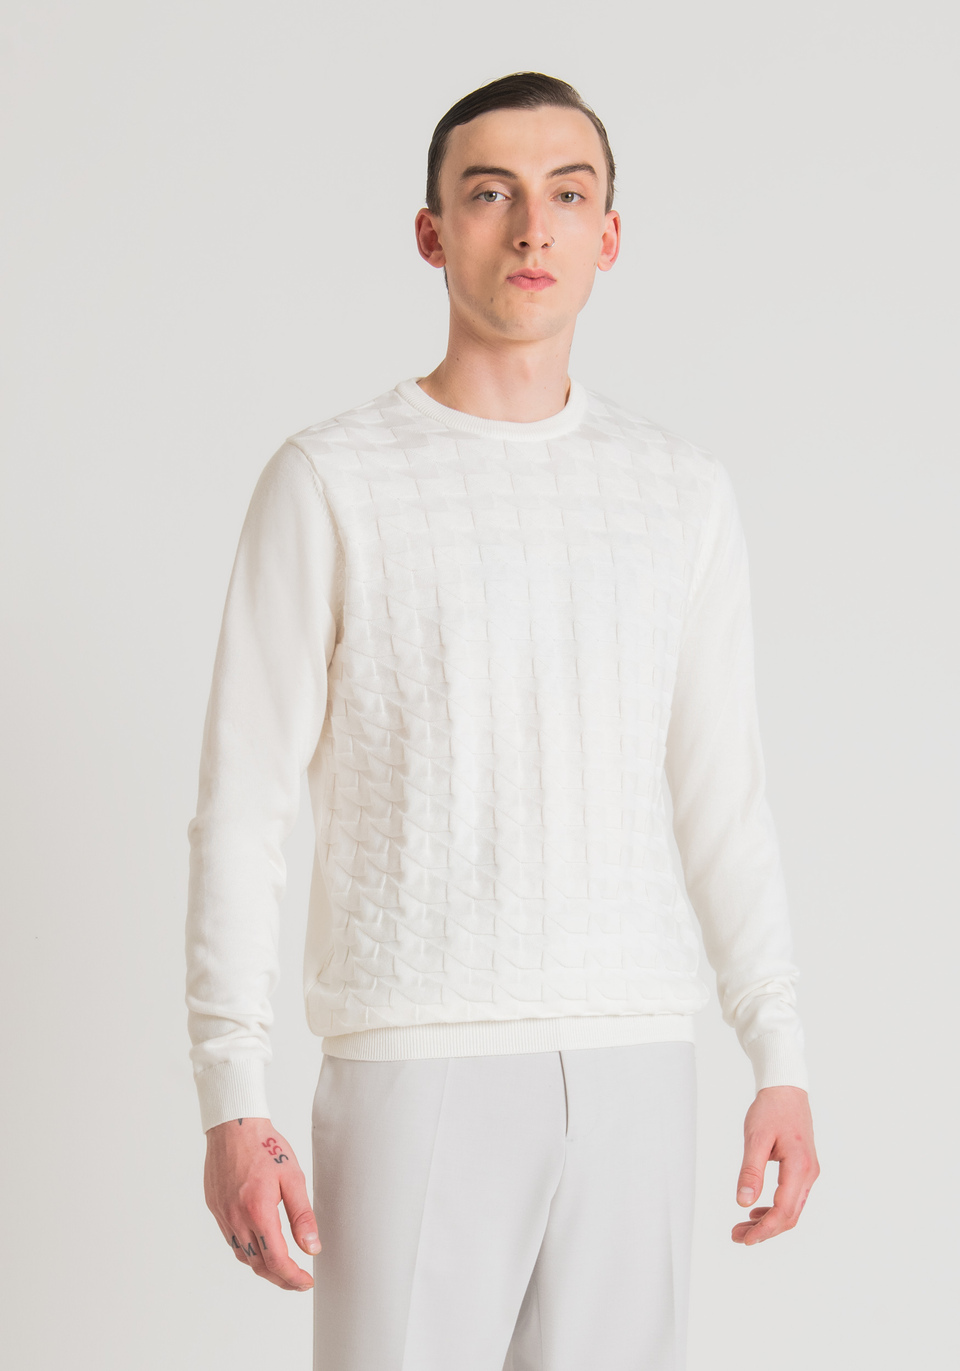 REGULAR FIT SWEATER IN 3D JACQUARD WOOL AND COTTON - Antony Morato Online Shop